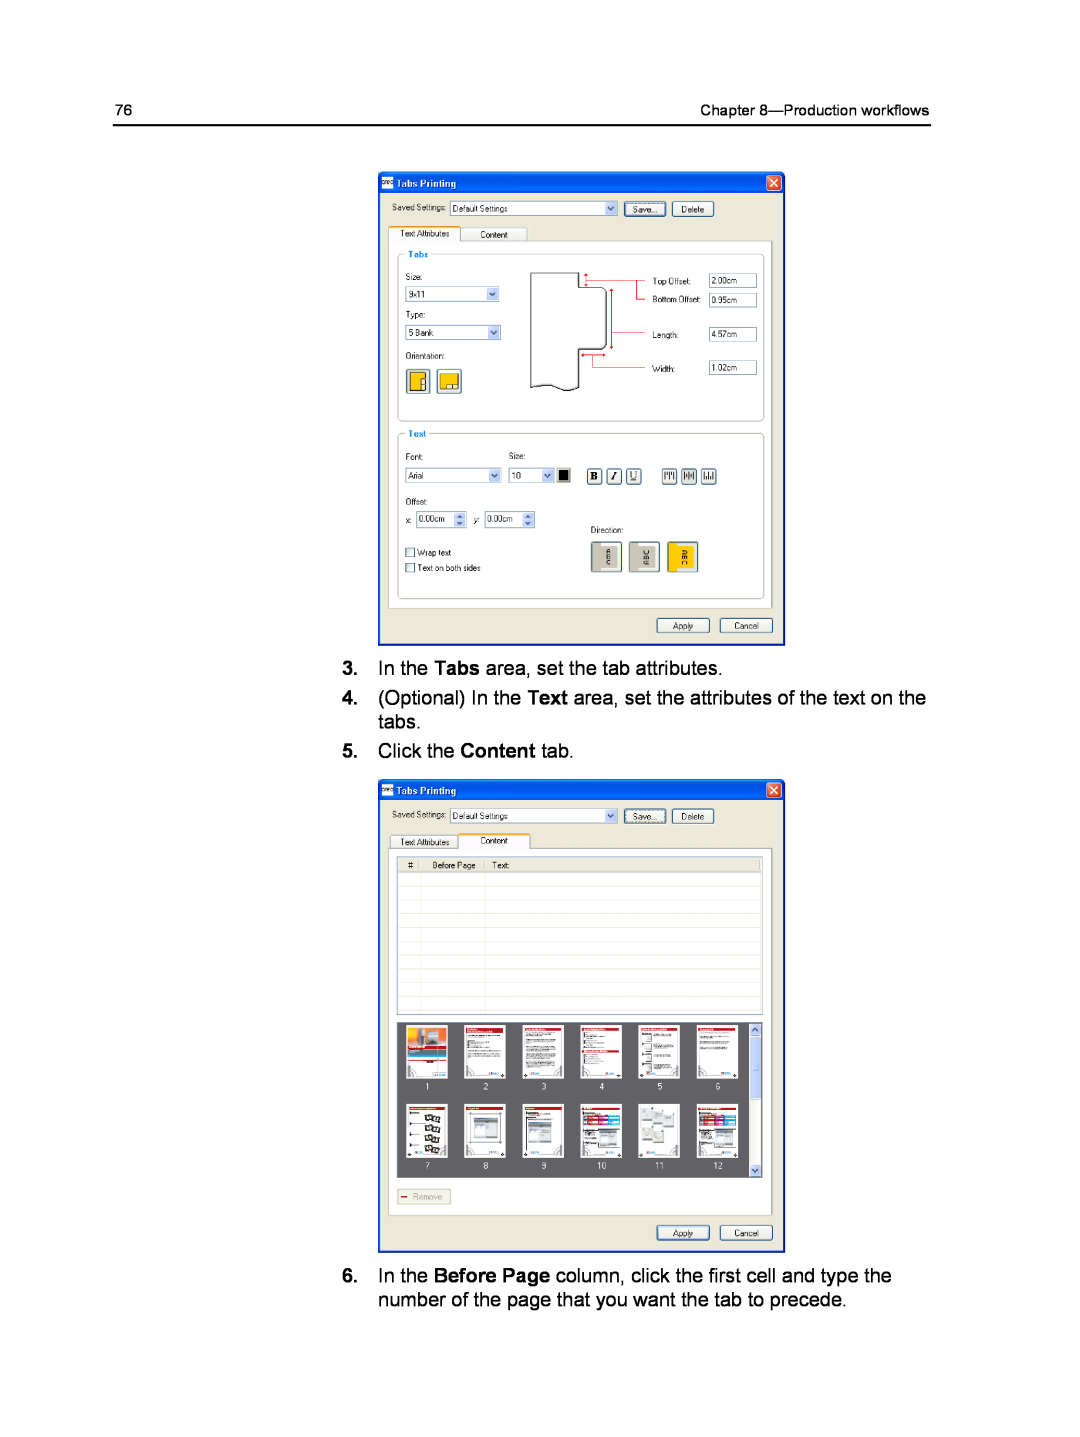 Xerox 560, 550 manual In the Tabs area, set the tab attributes, Click the Content tab, Productionworkflows 